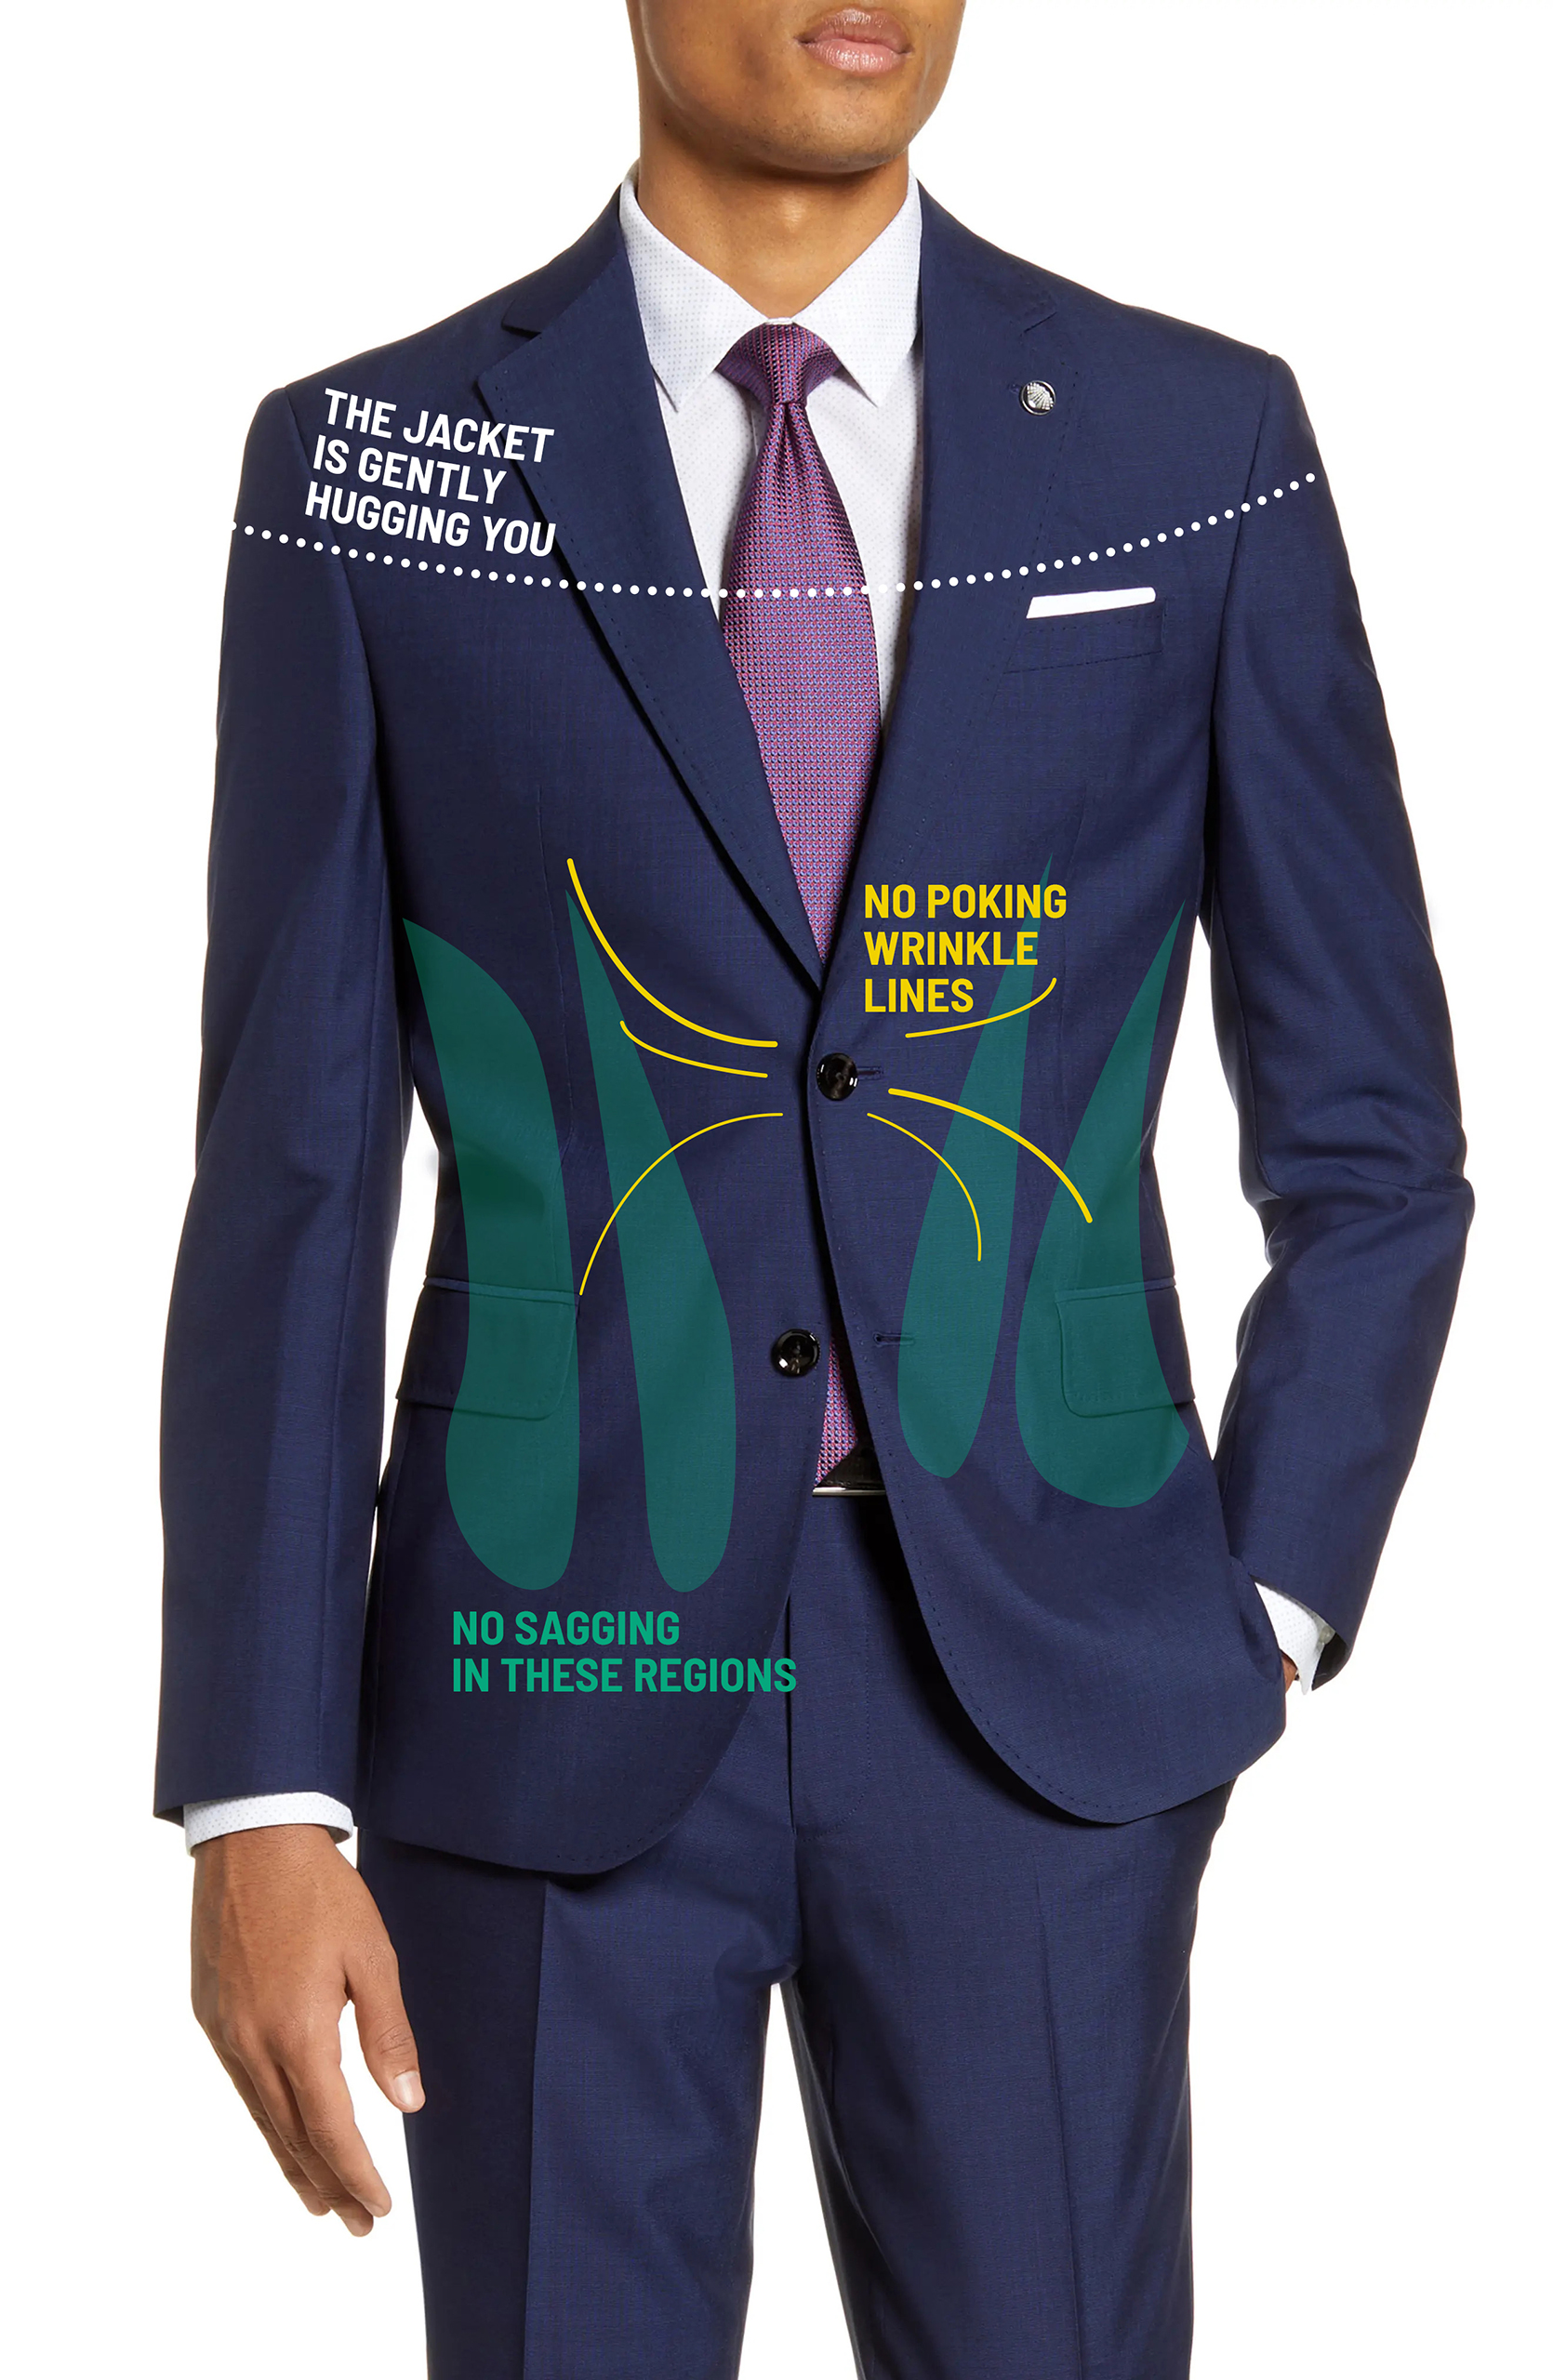 How should a suit fit: flawless jacket closure